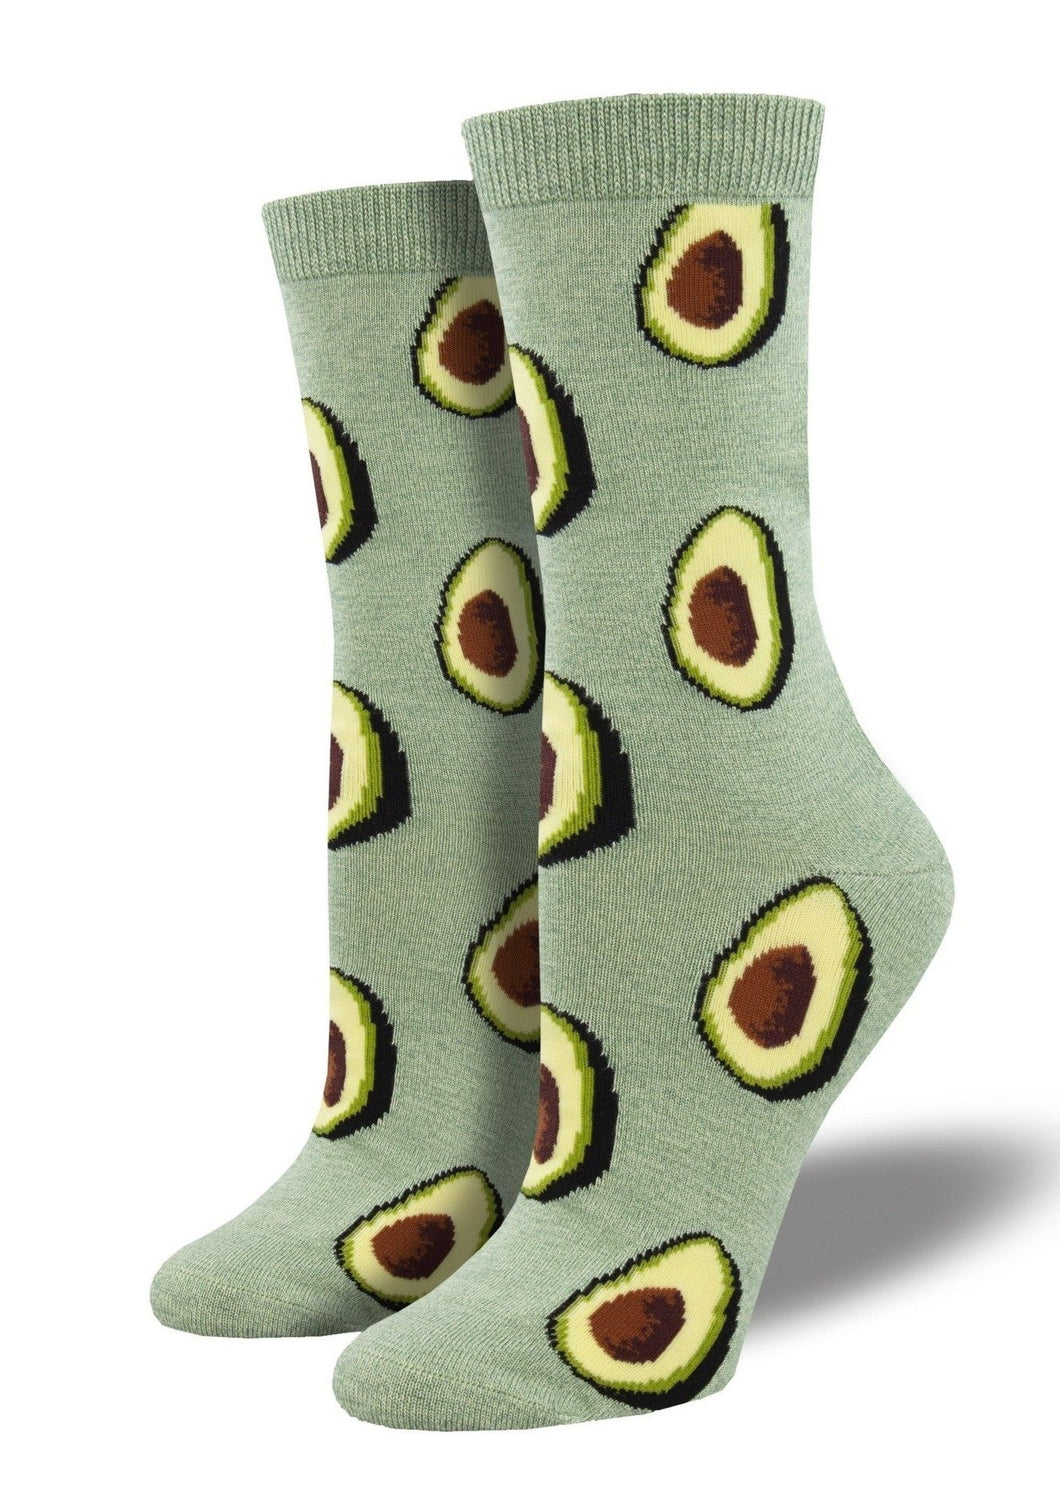 Green with Avocado Halves. Soft, Breathable, Moisture Wicking, Antibacterial, Hypoallergenic, Amazing Socks! One Size Fits Most (Women's 5-11) Fabrication: 66% Rayon from Bamboo, 32% Nylon, 2% Spandex SockSmith $20.00 